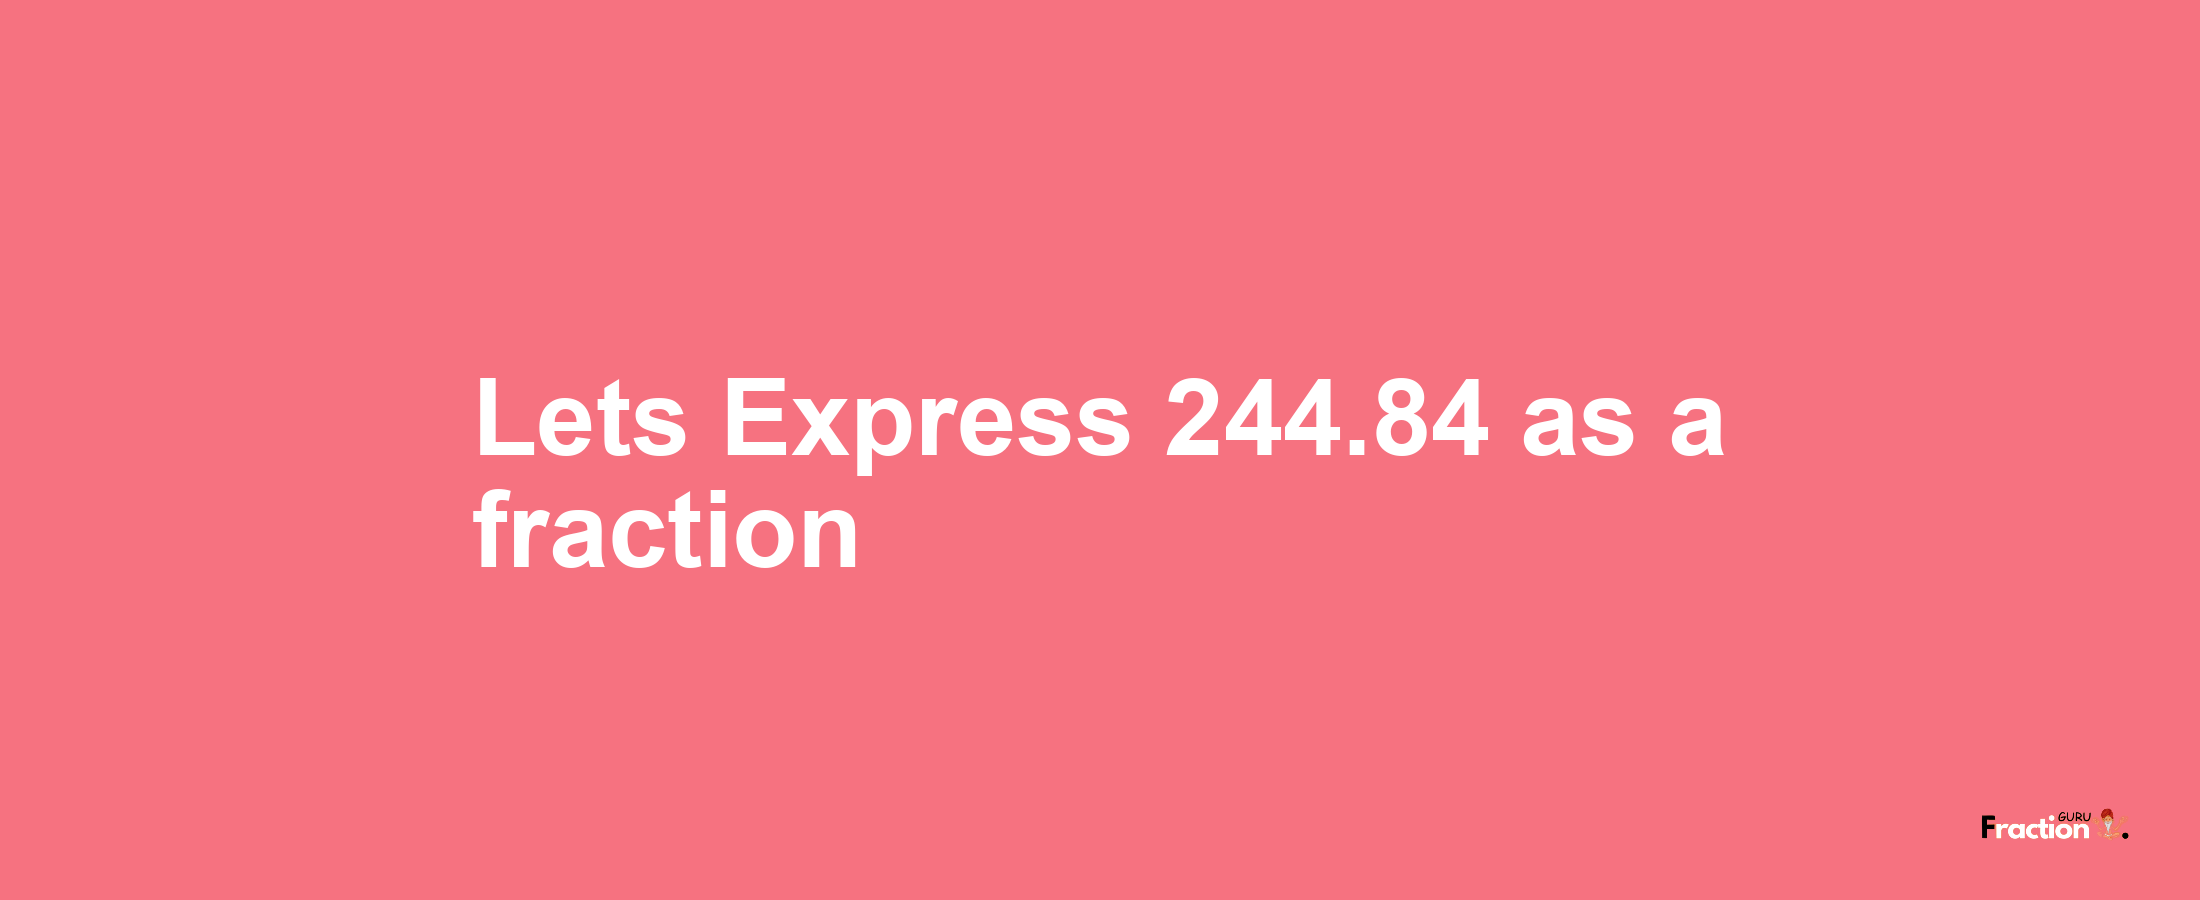 Lets Express 244.84 as afraction